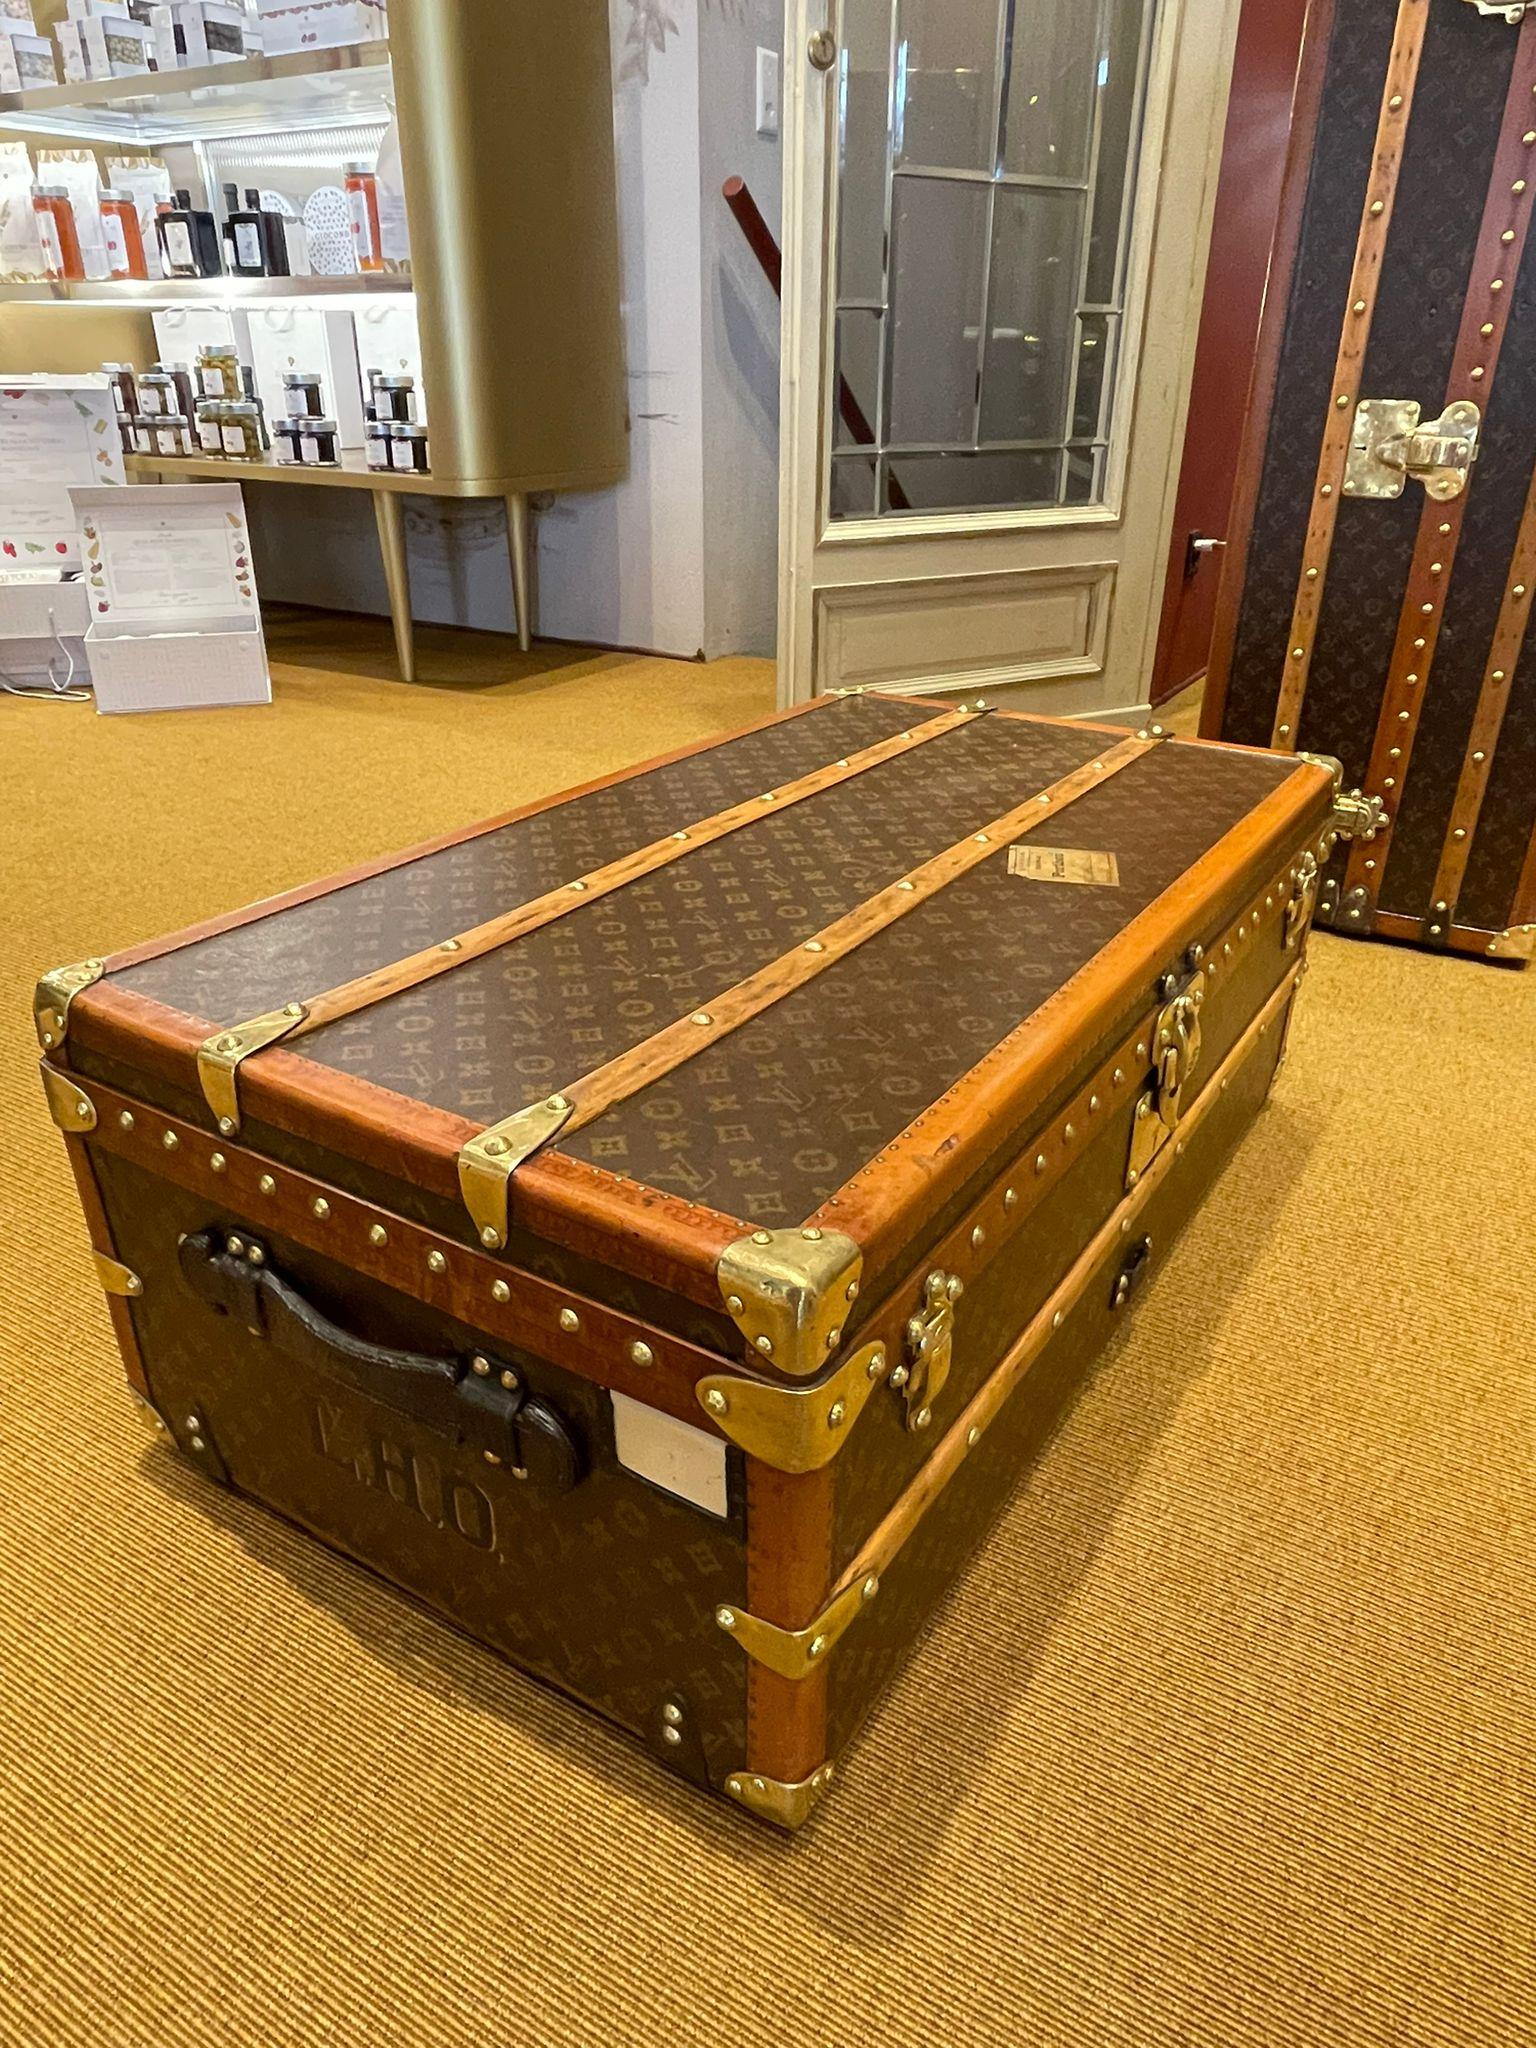 Louis Vuitton's elegant and exclusive Malle Cabine trunk, the Maison's travel icon. The sophisticated creation, with its compact design, was intended to be stowed under the cabin bed of an early 20th century ocean liner. The refined model, equipped